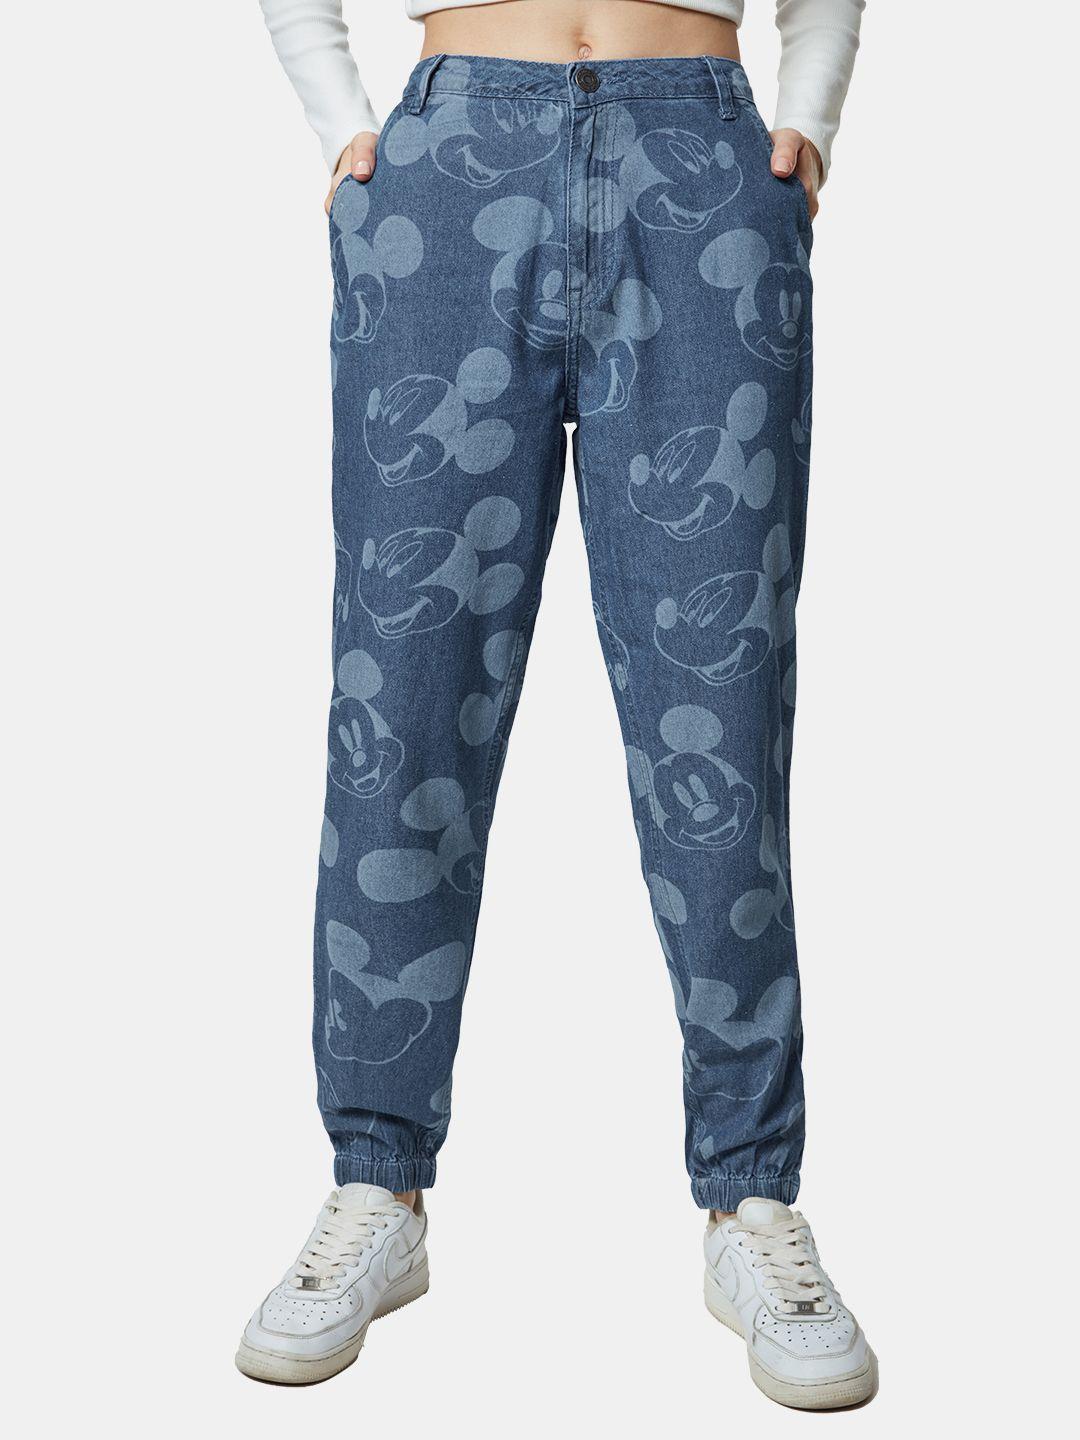 the souled store women mickey mouse printed cotton jogger